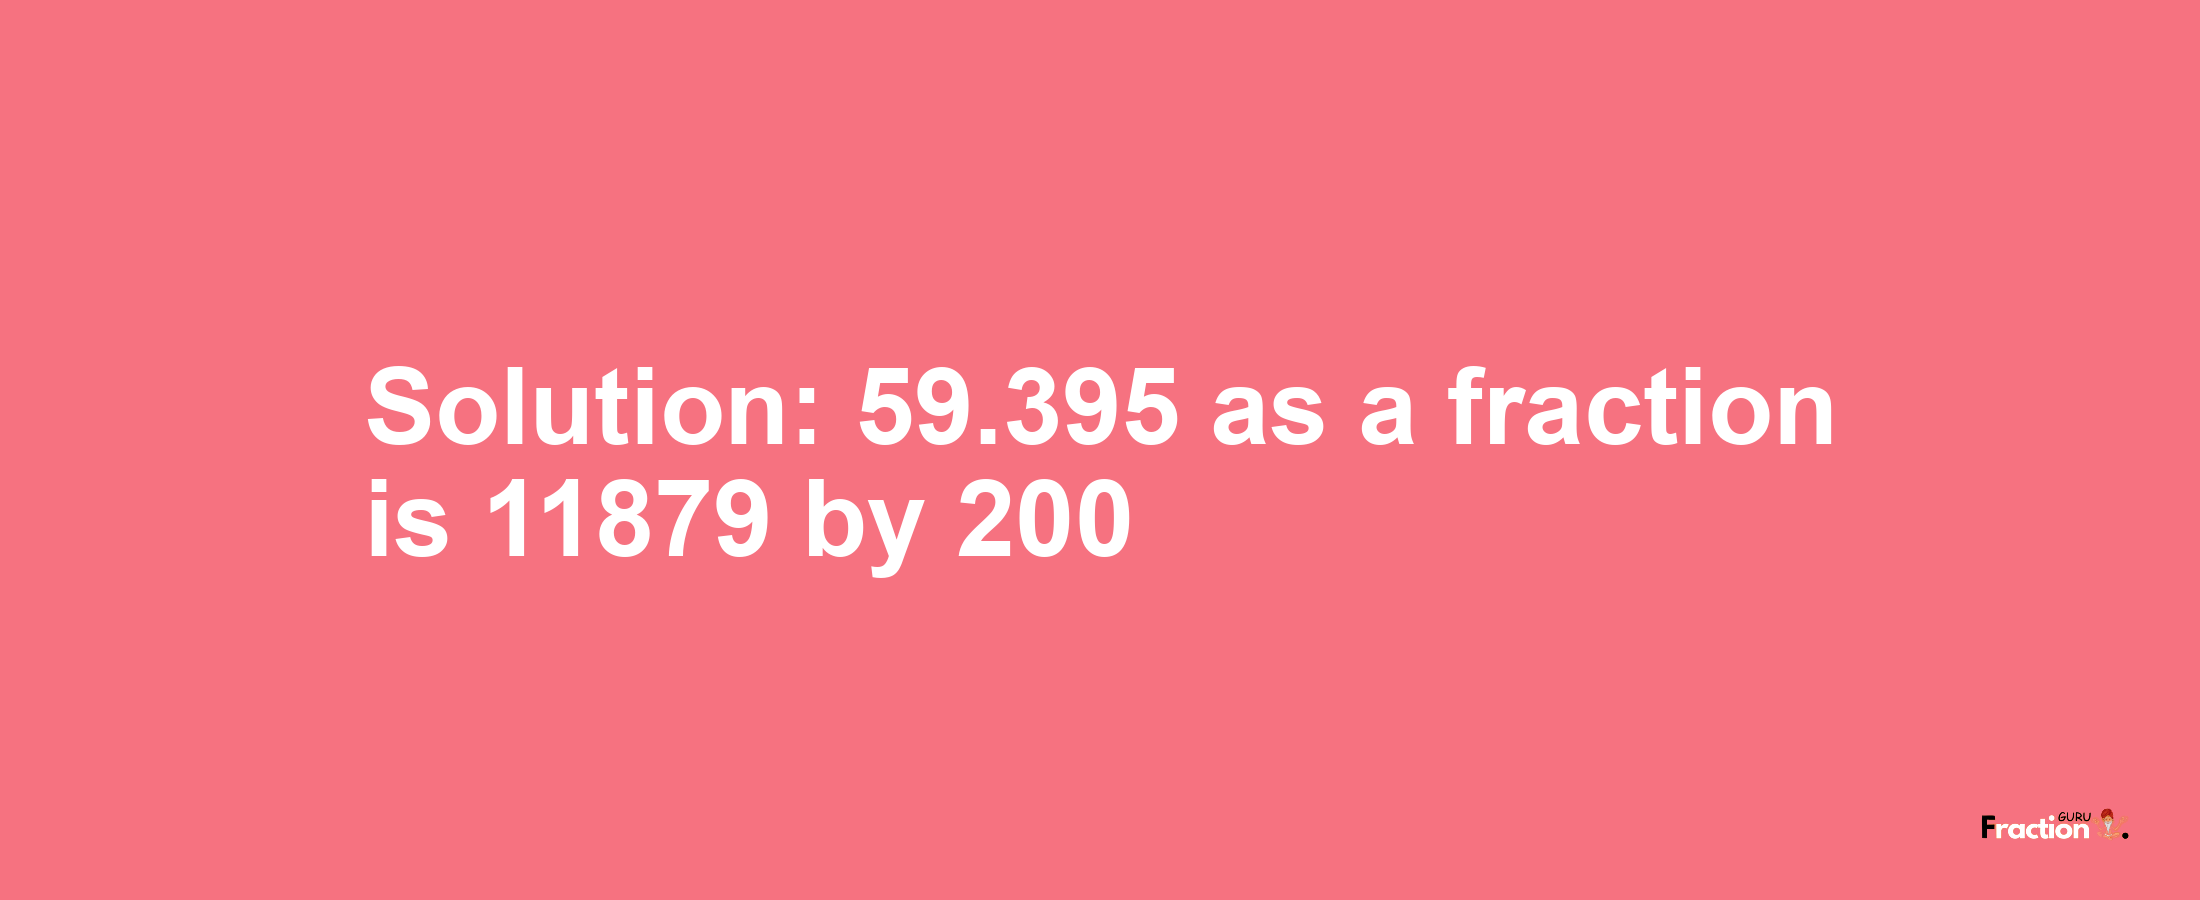 Solution:59.395 as a fraction is 11879/200